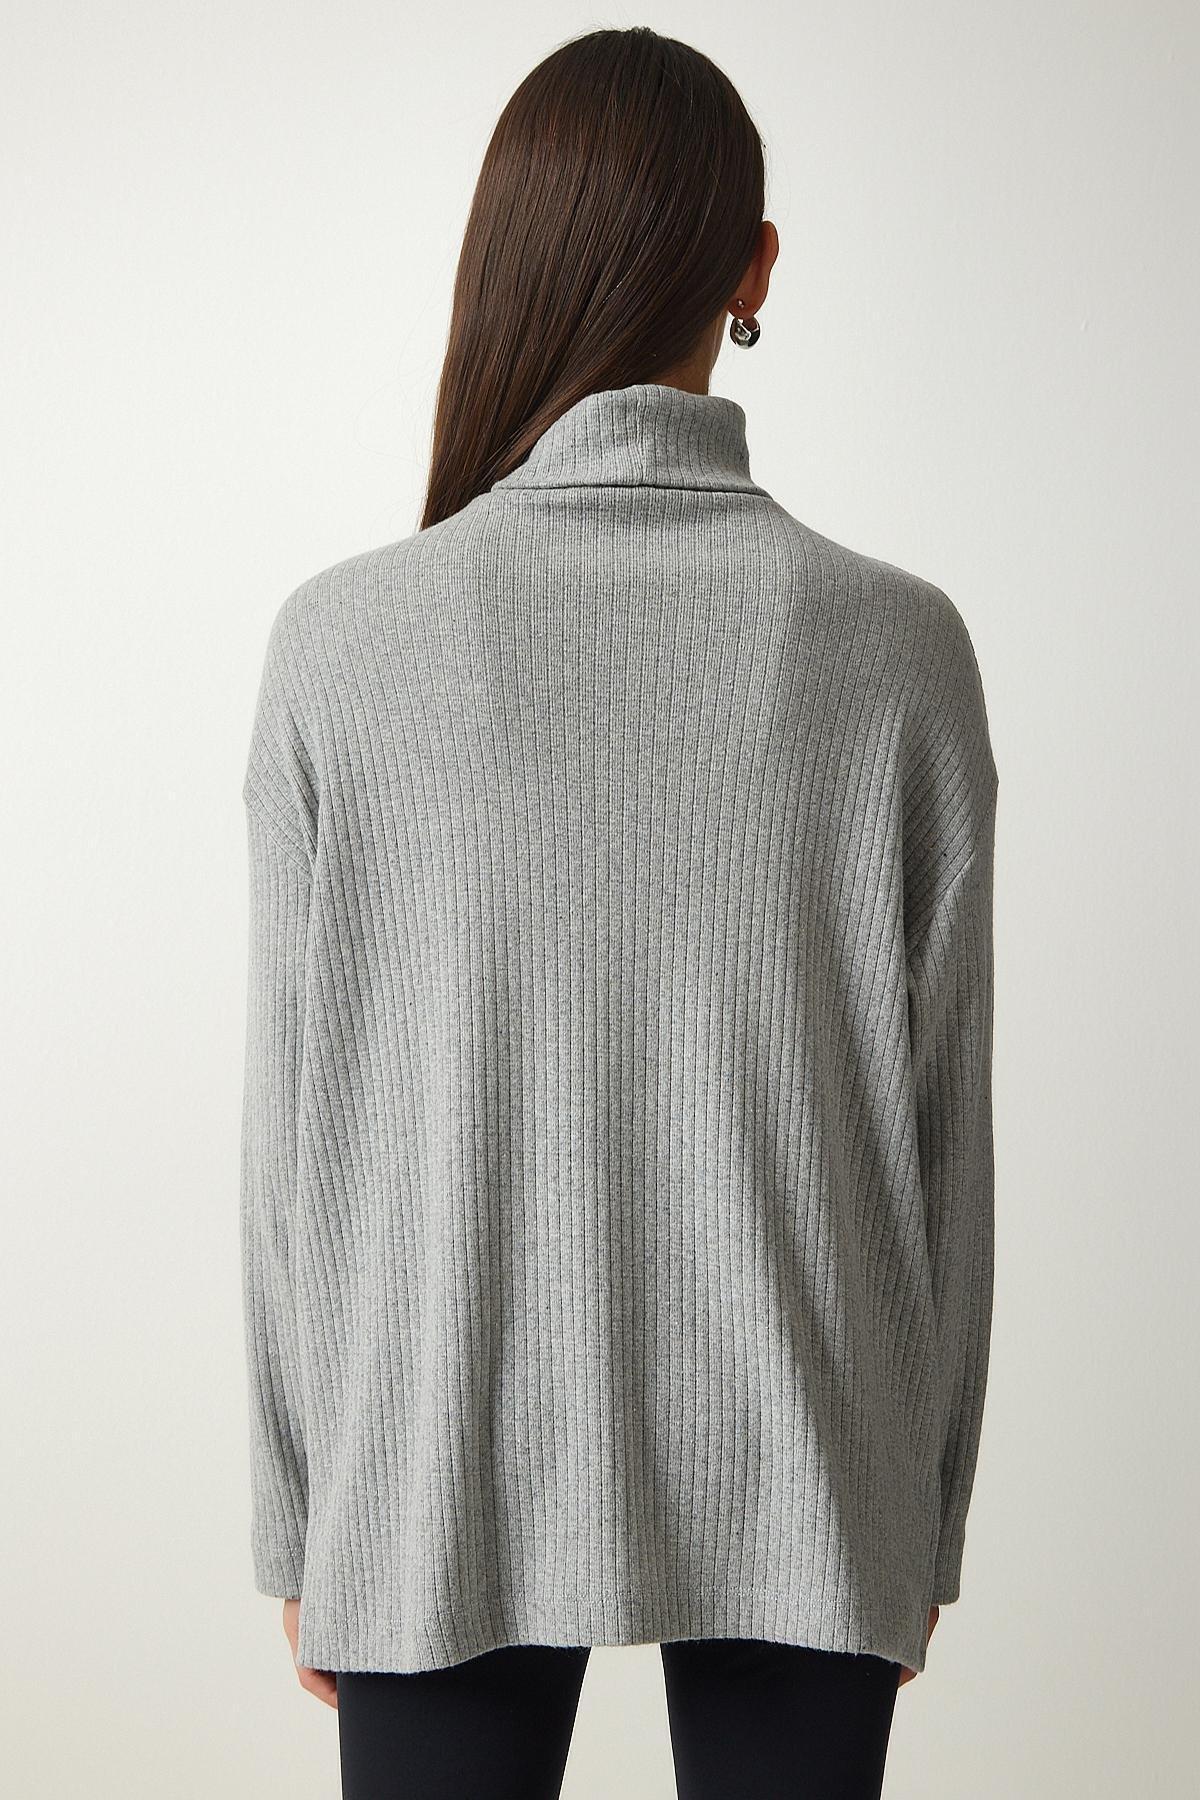 Happiness Istanbul - Womens Gray Turtleneck Ribbed Oversize Knitted Blouse UB00213, Einzeln